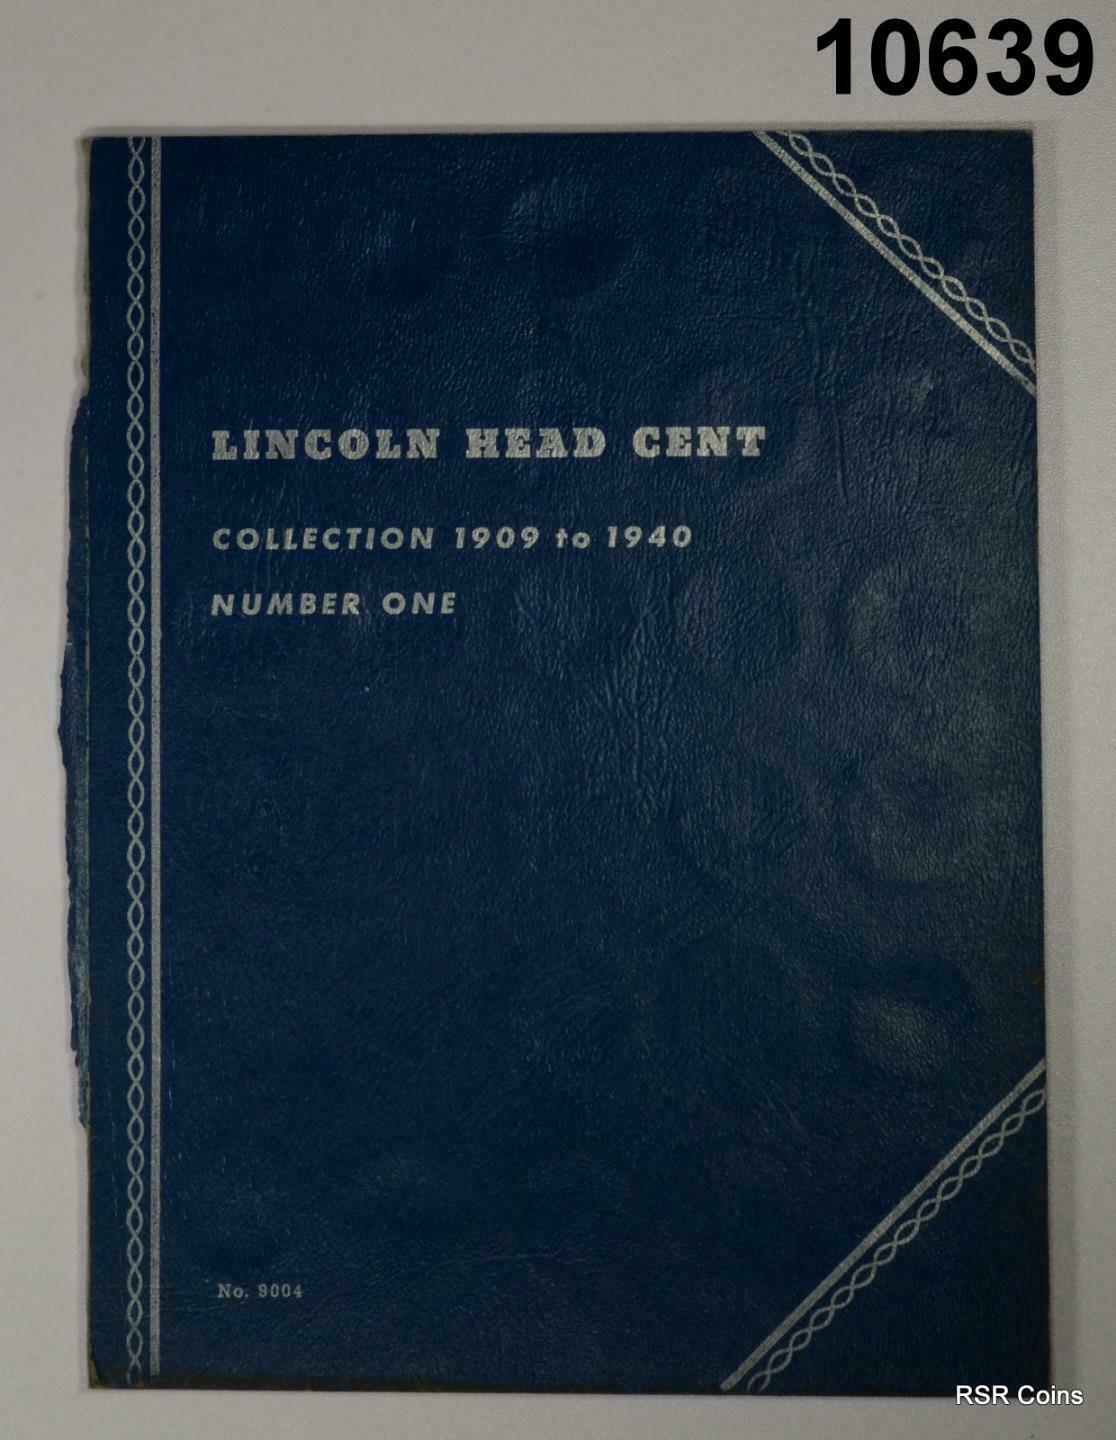 G-XF EARLY LINCOLN STARTER COLLECTOR 17 COIN SET AS SHOWN! #10639